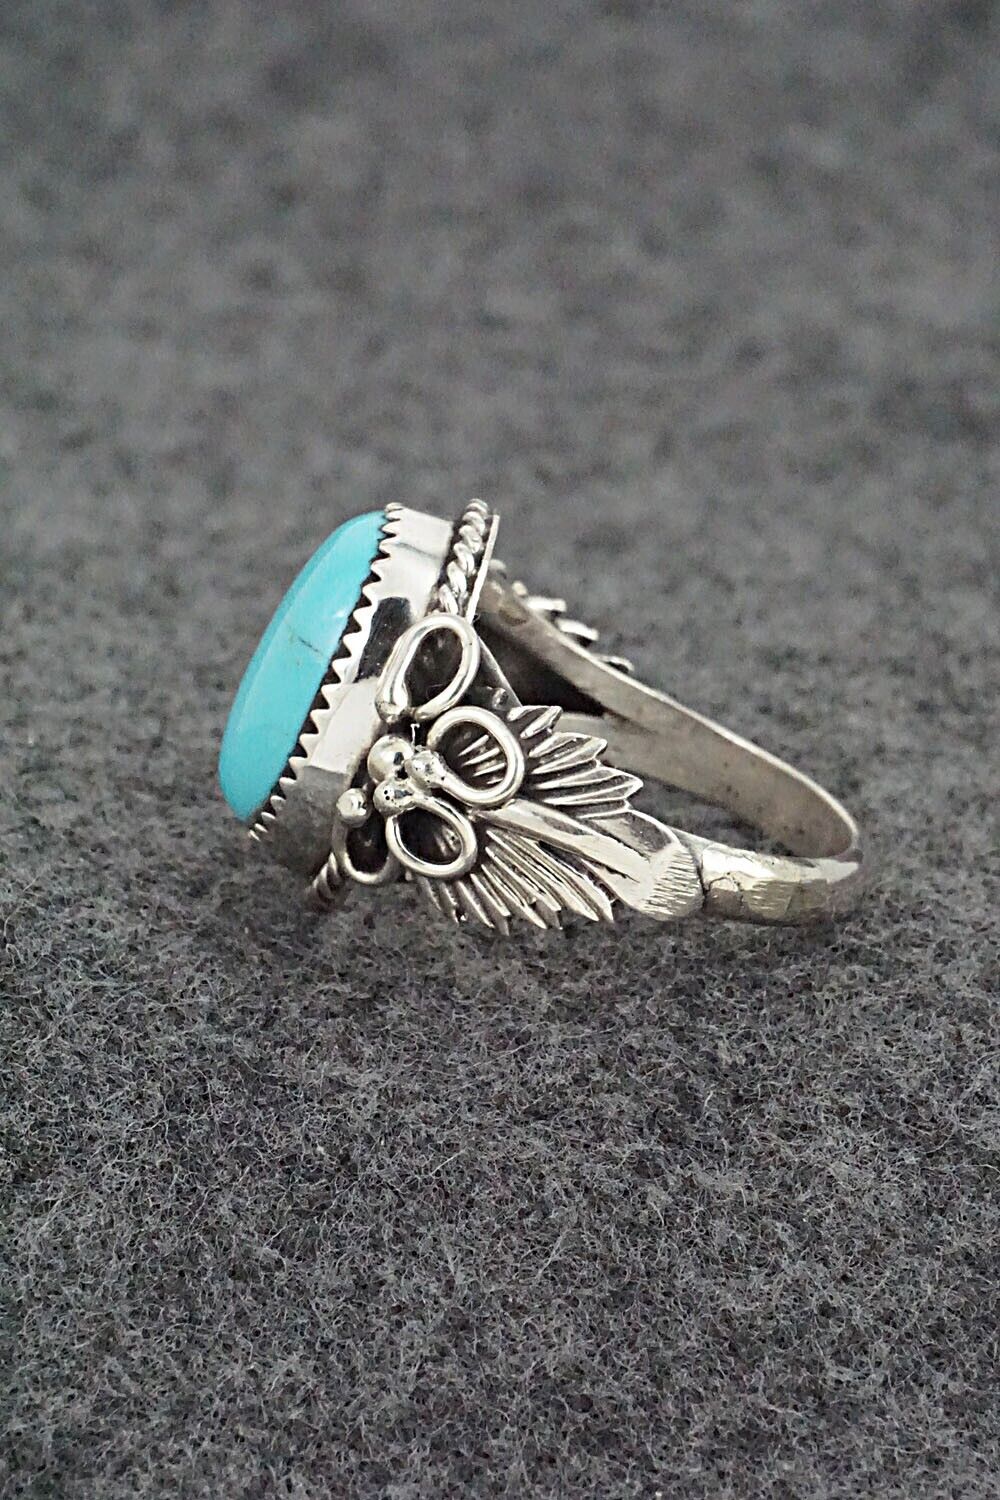 Turquoise & Sterling Silver Ring - Jeannette Saunders - Size 10.5